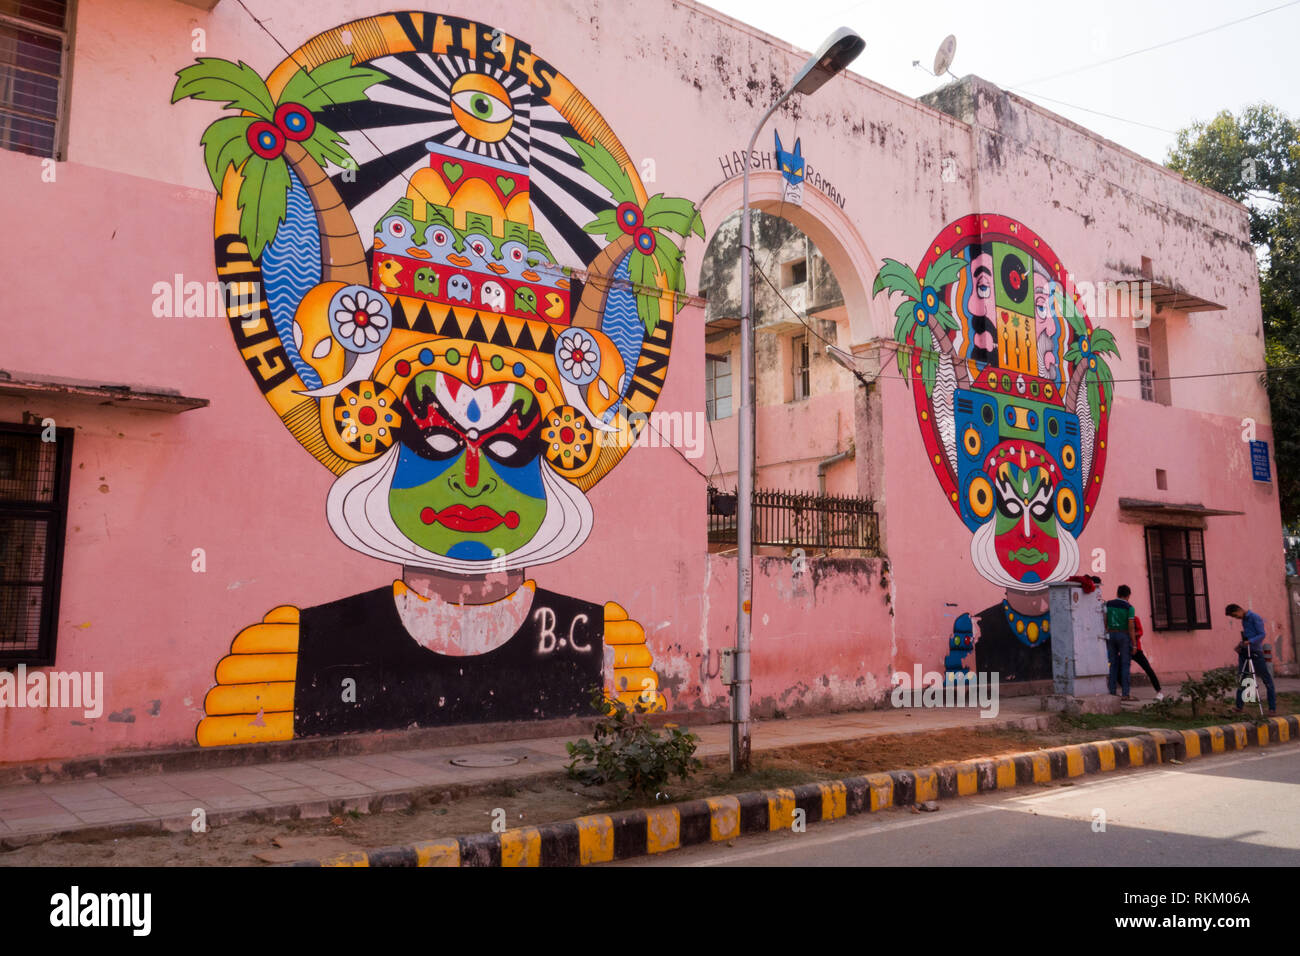 Group of young men filming in front of large street mural by Indian artist Harsh Raman, in Lodhi Colony, New Delhi, India Stock Photo